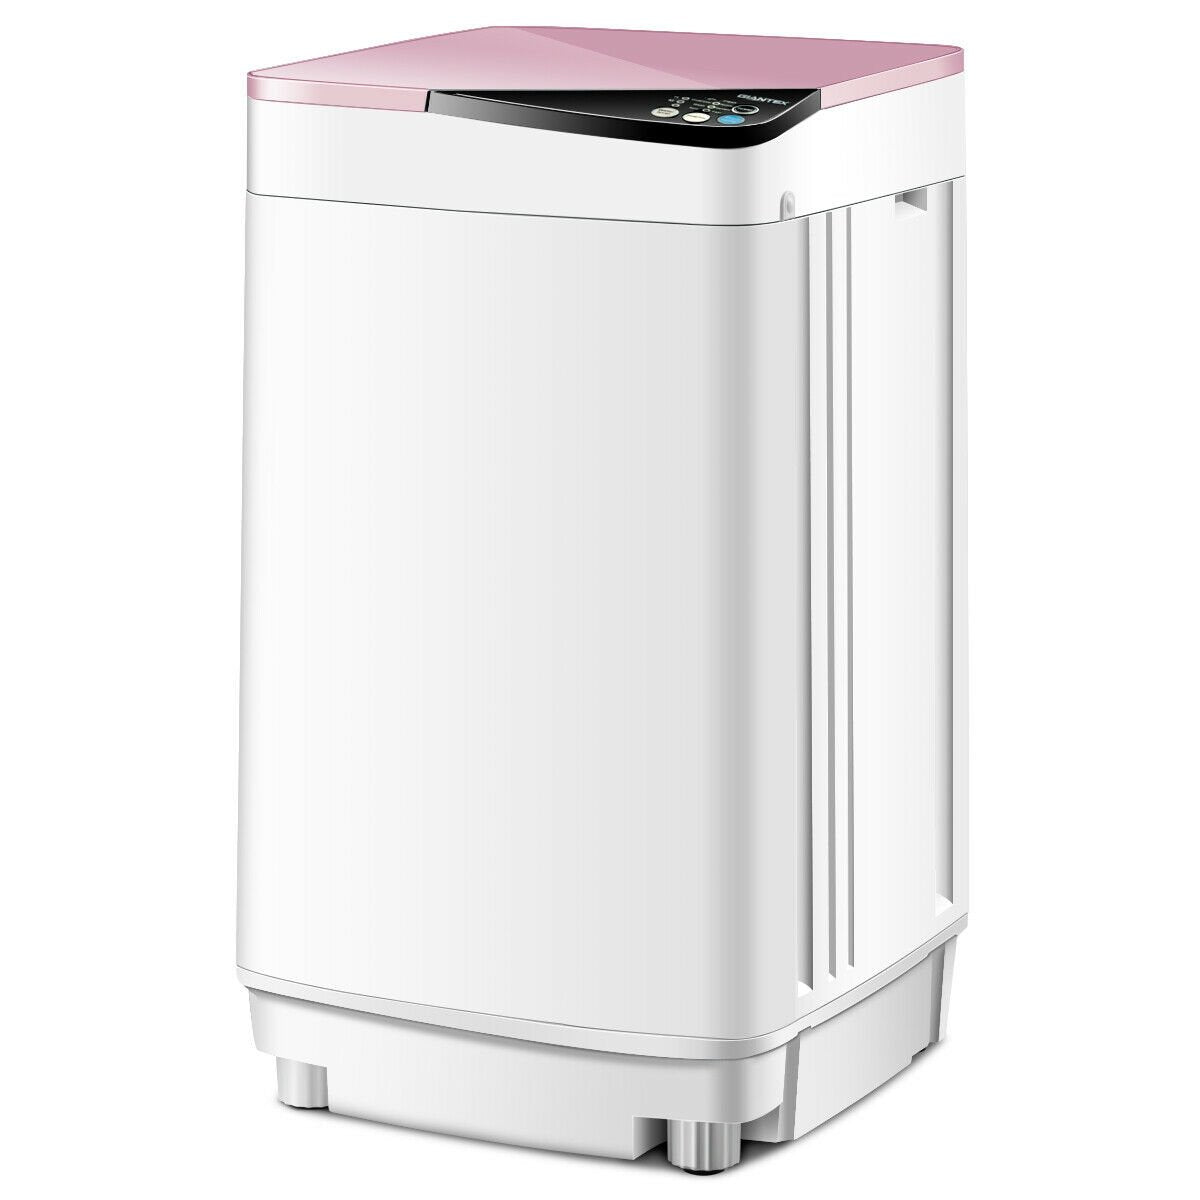 Full-automatic Washing Machine 7.7 lbs Washer / Spinner Germicidal, Pink at Gallery Canada